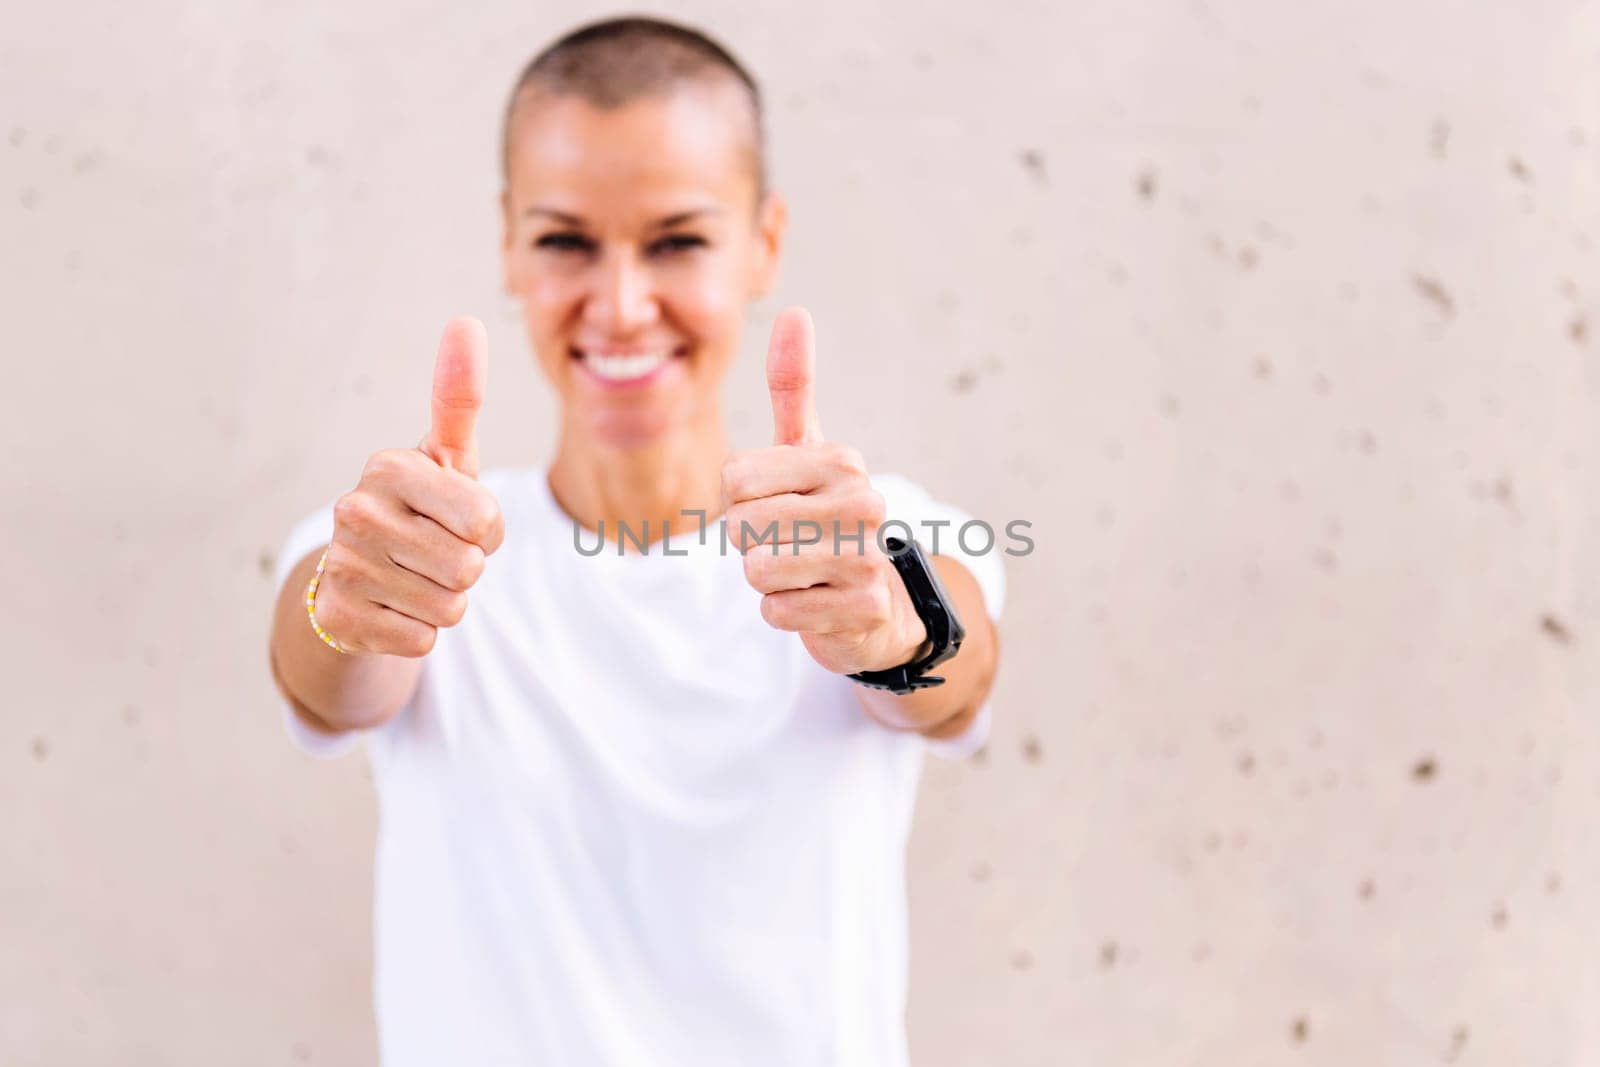 woman with short hair smiling with with thumbs up by raulmelldo